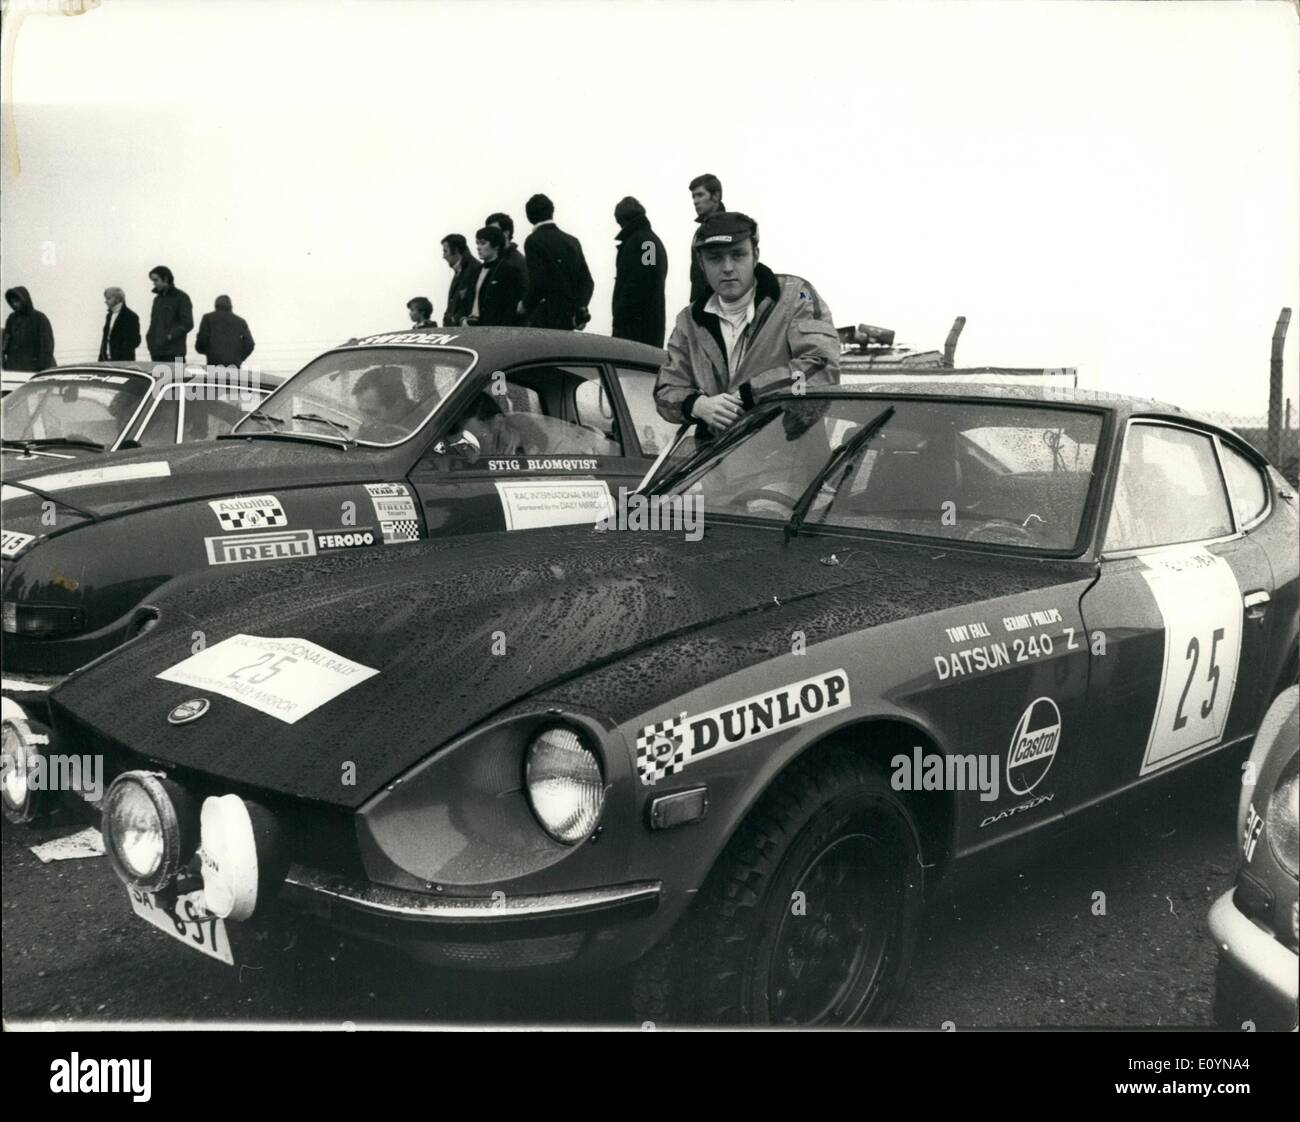 Nov. 11, 1970 - Start Of The RAC International Rally Of Great Britain - Centre Airport Hotel-Longford: The 2,300-mile RAC International Rally of Great Britain which is sponsored by the mirror start this morning from the Centre Airport Hotel, Longford. Many countries are taking part which include Germany, Japan, Sweden, France, Finland., Italy and East Germany. Photo Shows Tony Fall with his Dtsum 2402 before the start of the Rally. Stock Photo